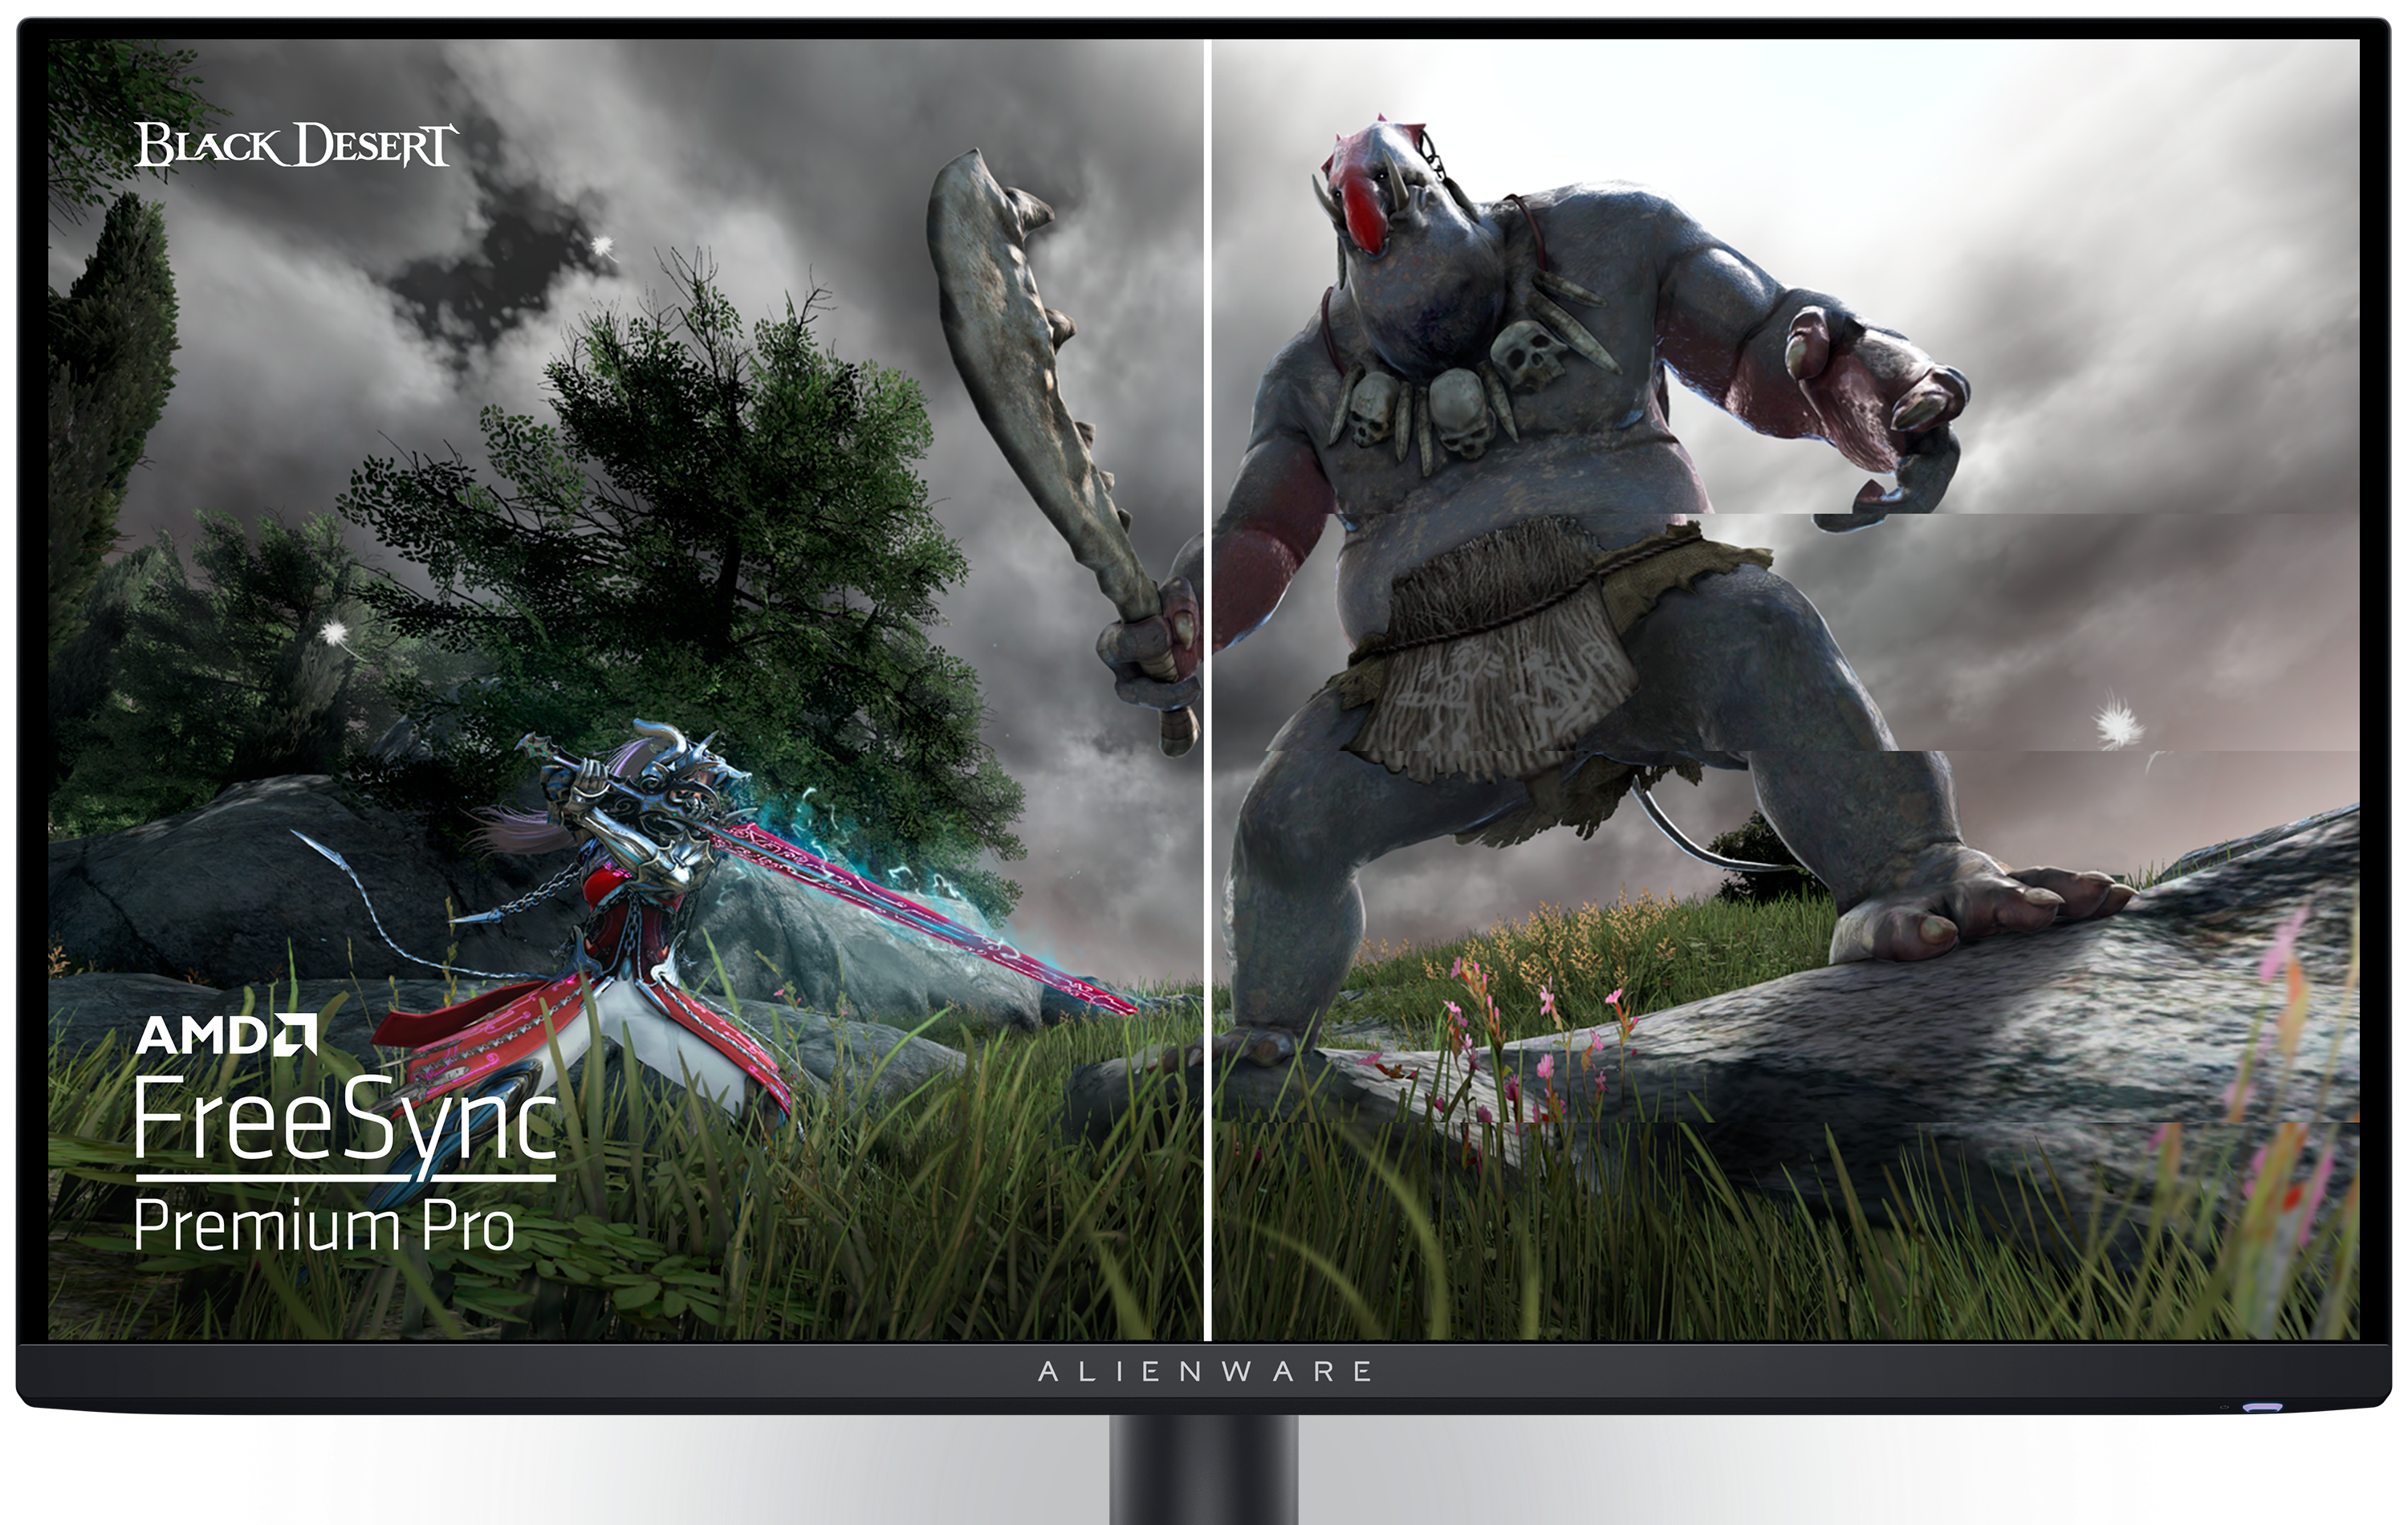 Dell AW2725DF Gaming Monitor with a Black Desert game image and an AMD logo on the screen.